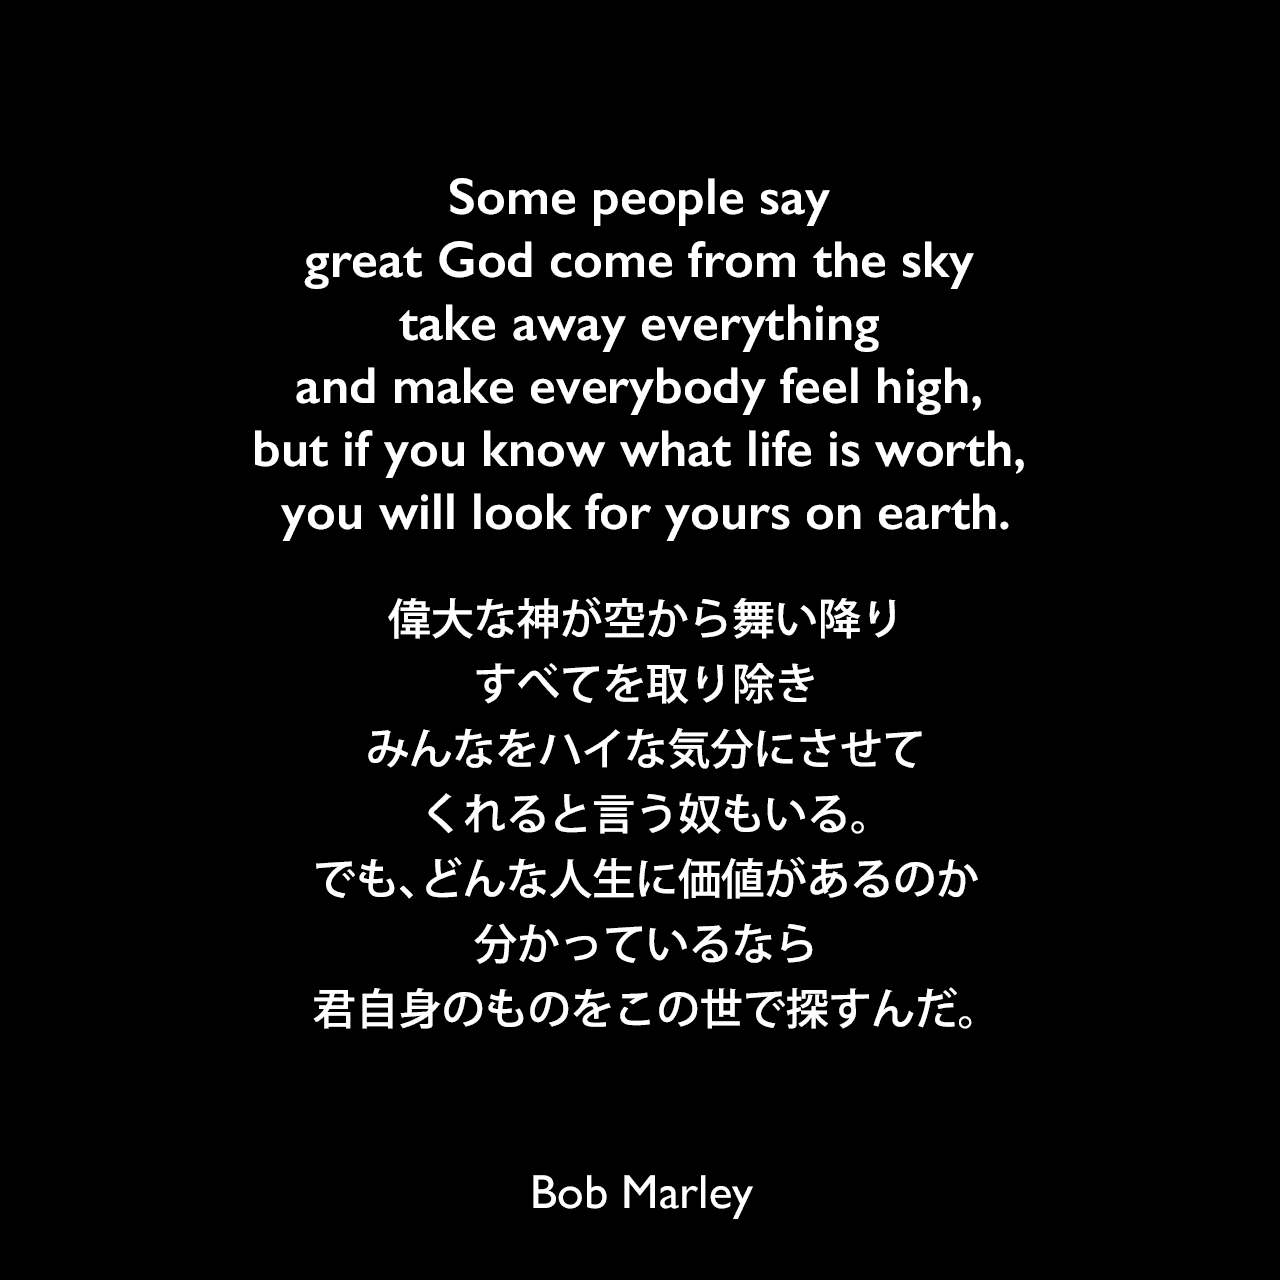 Some people say great God come from the sky take away everything and make everybody feel high, but if you know what life is worth, you will look for yours on earth.偉大な神が空から舞い降り、すべてを取り除き、みんなをハイな気分にさせてくれると言う奴もいる。でも、どんな人生に価値があるのか分かっているなら、君自身のものをこの世で探すんだ。Bob Marley